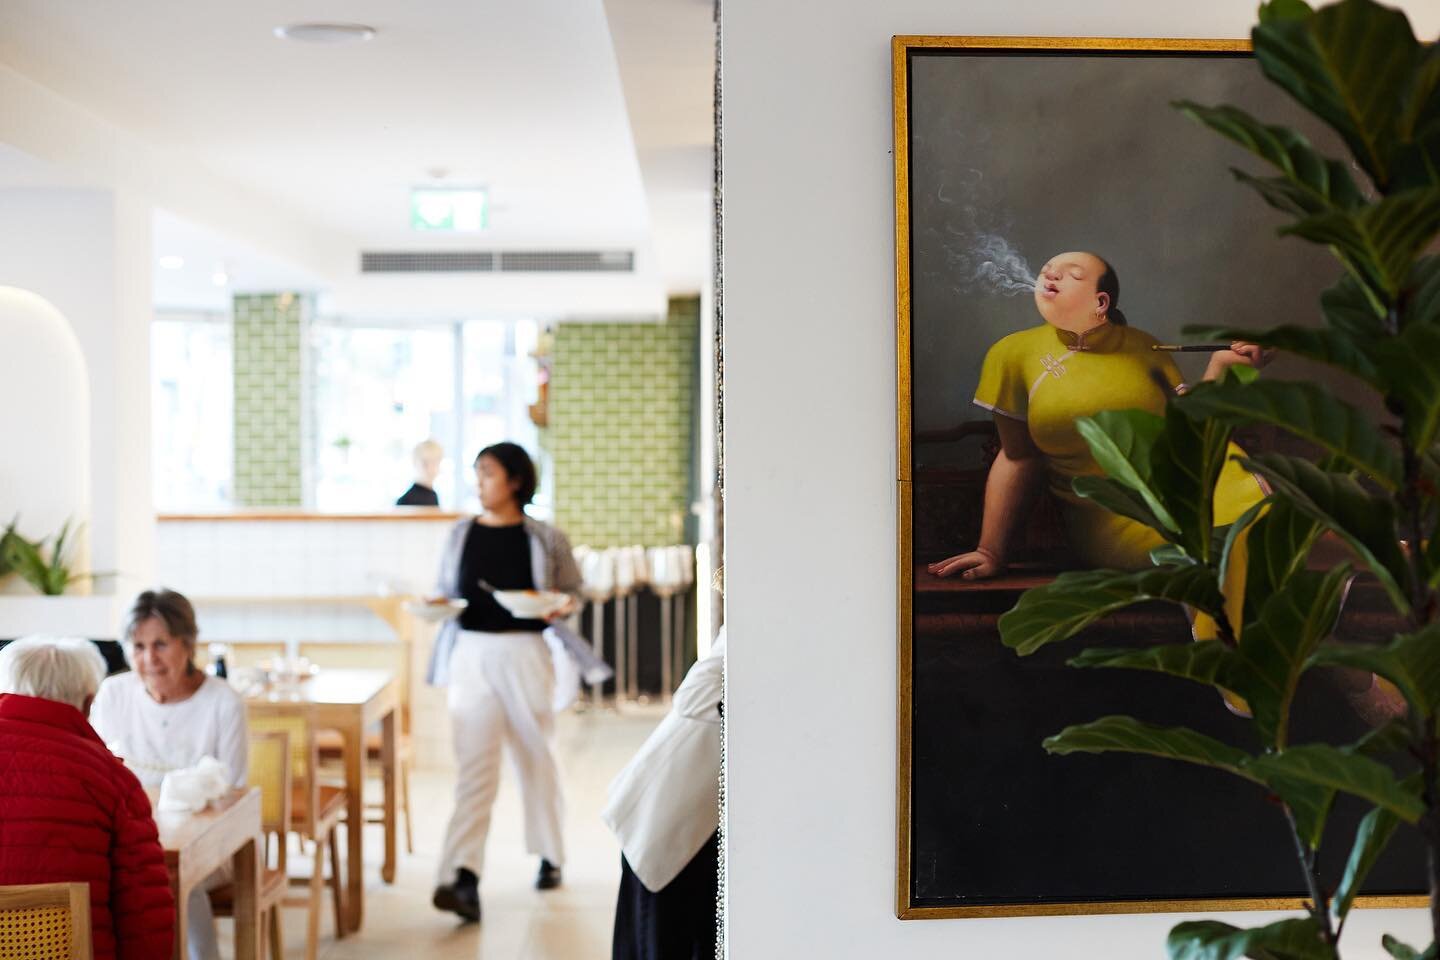 Photographed  @lanternfish_manly for @broadsheet_syd